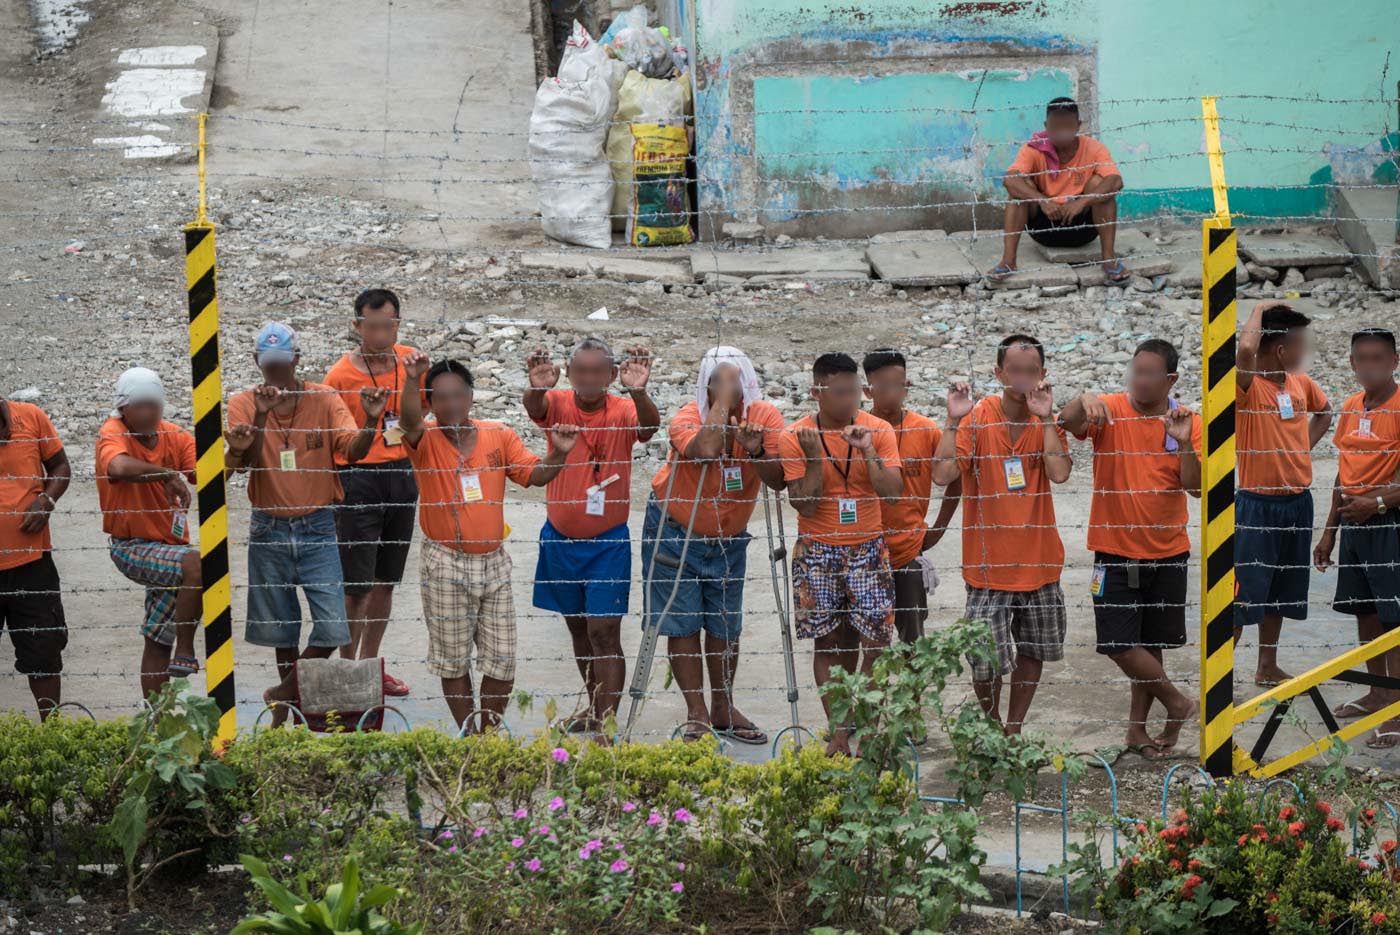 STATE PENITENTIARY. Prisoners at the New Bilibid Prison watch visiting lawmakers checking prison conditions on October 29, 2019. Photos by Lisa Marie David/Rappler
   